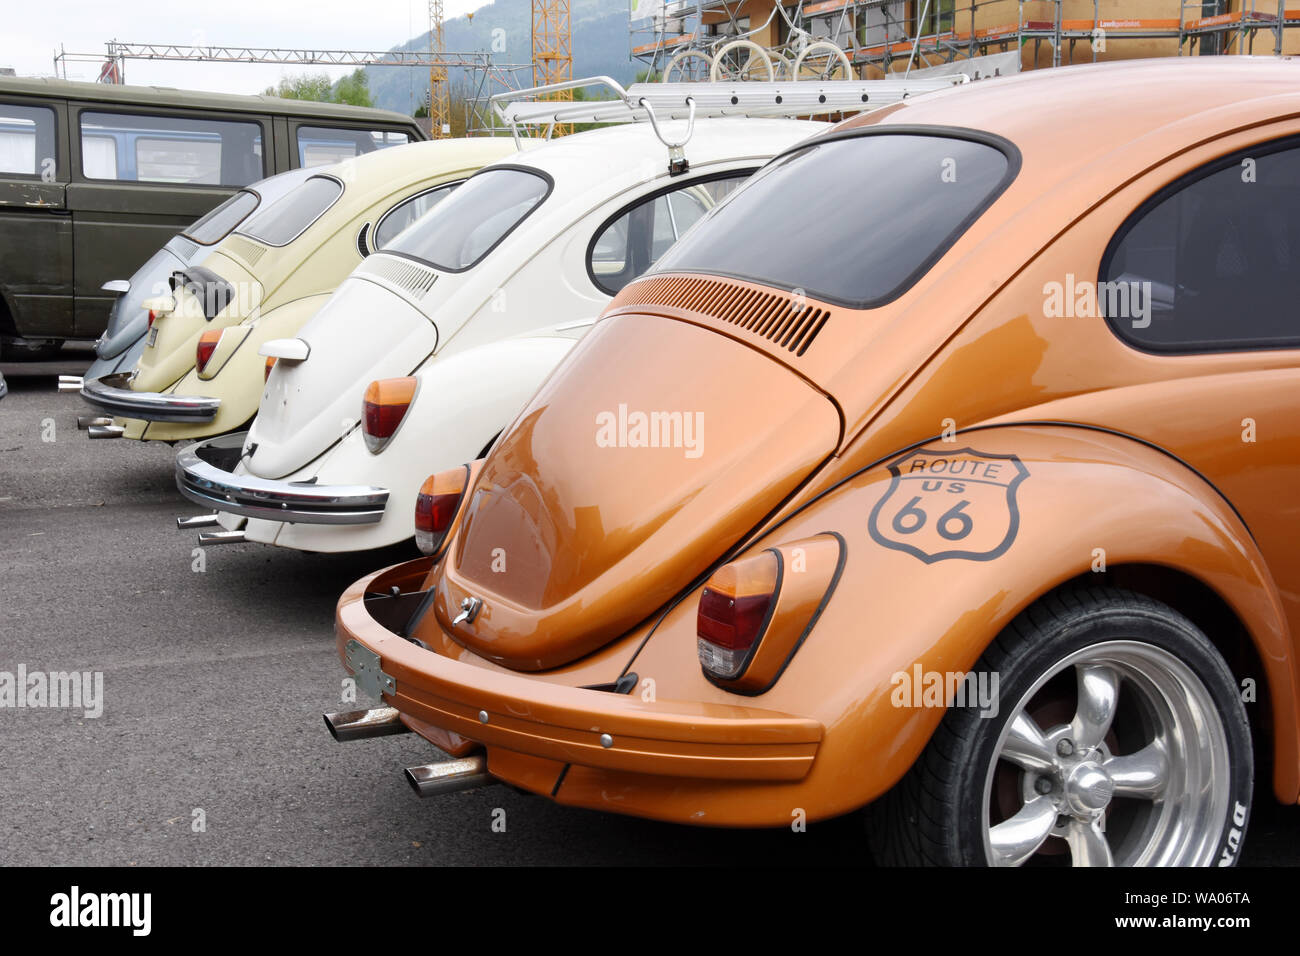 Vw Kafer High Resolution Stock Photography and Images - Alamy